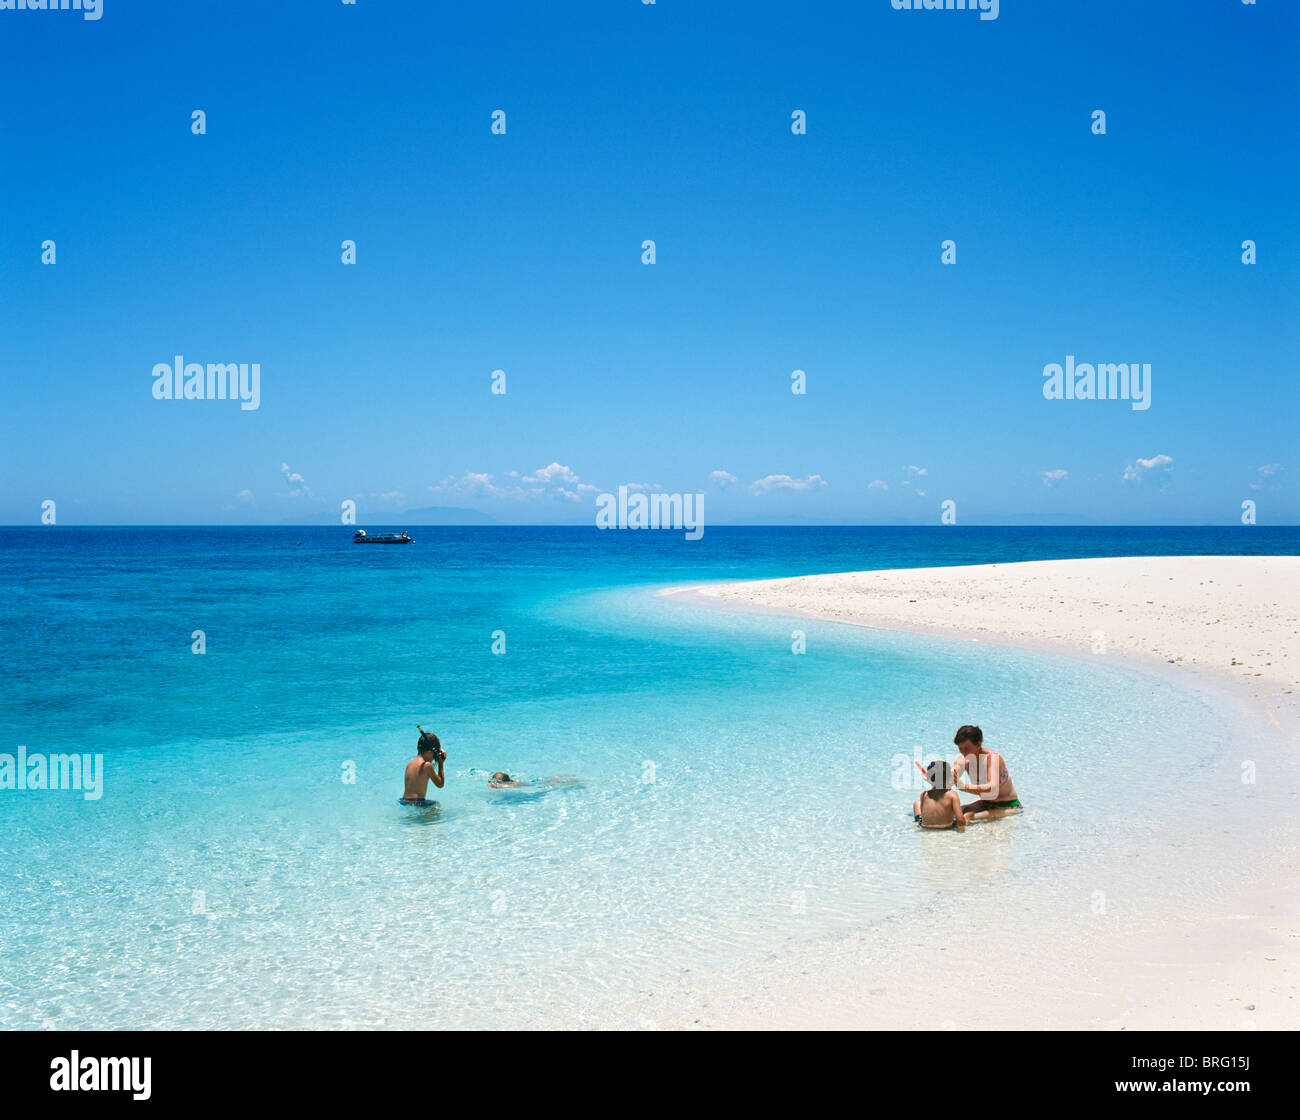 Great Barrier Reef, Australia. Family on a sandbank with a dive boat in the distance, near Cairns, North Queensland, Australia Stock Photo